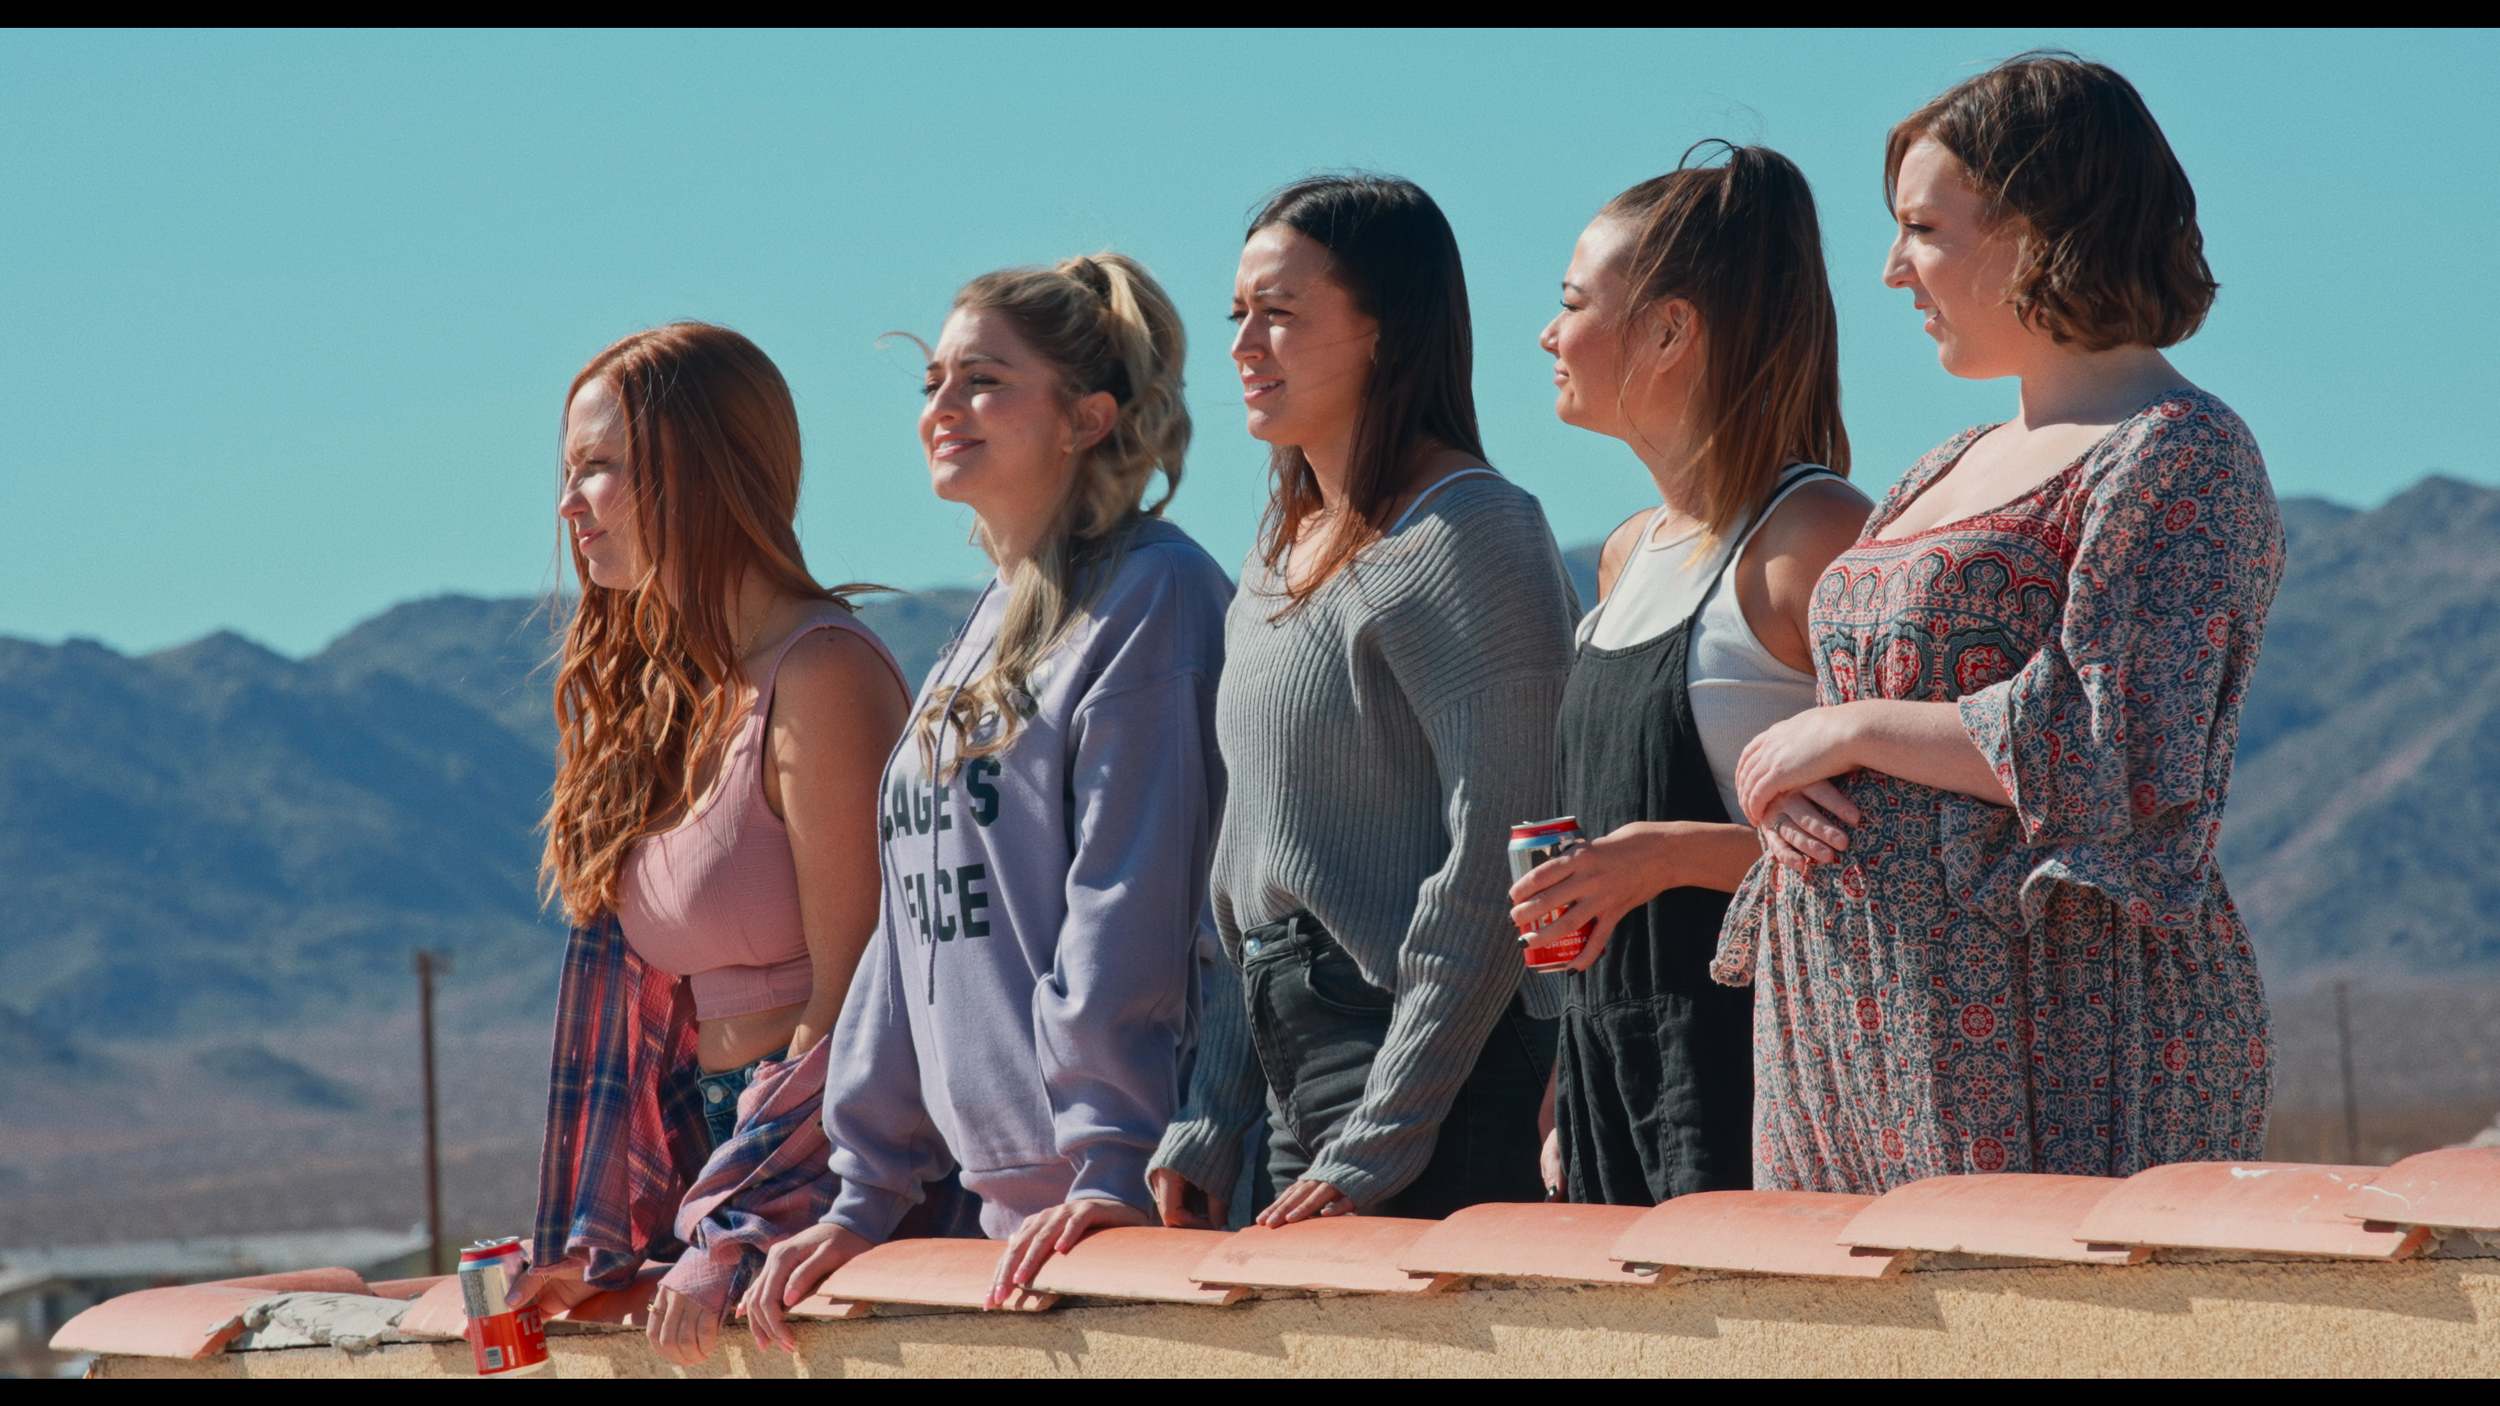 Claire Dellamar(Nora)_Geri Courtney-Austein(Marybeth)_Harley Bronwyn(Avery)_Mandie Cheung(Dylan)_Rochelle Anderson(Gillian)_Girls on Roof.png